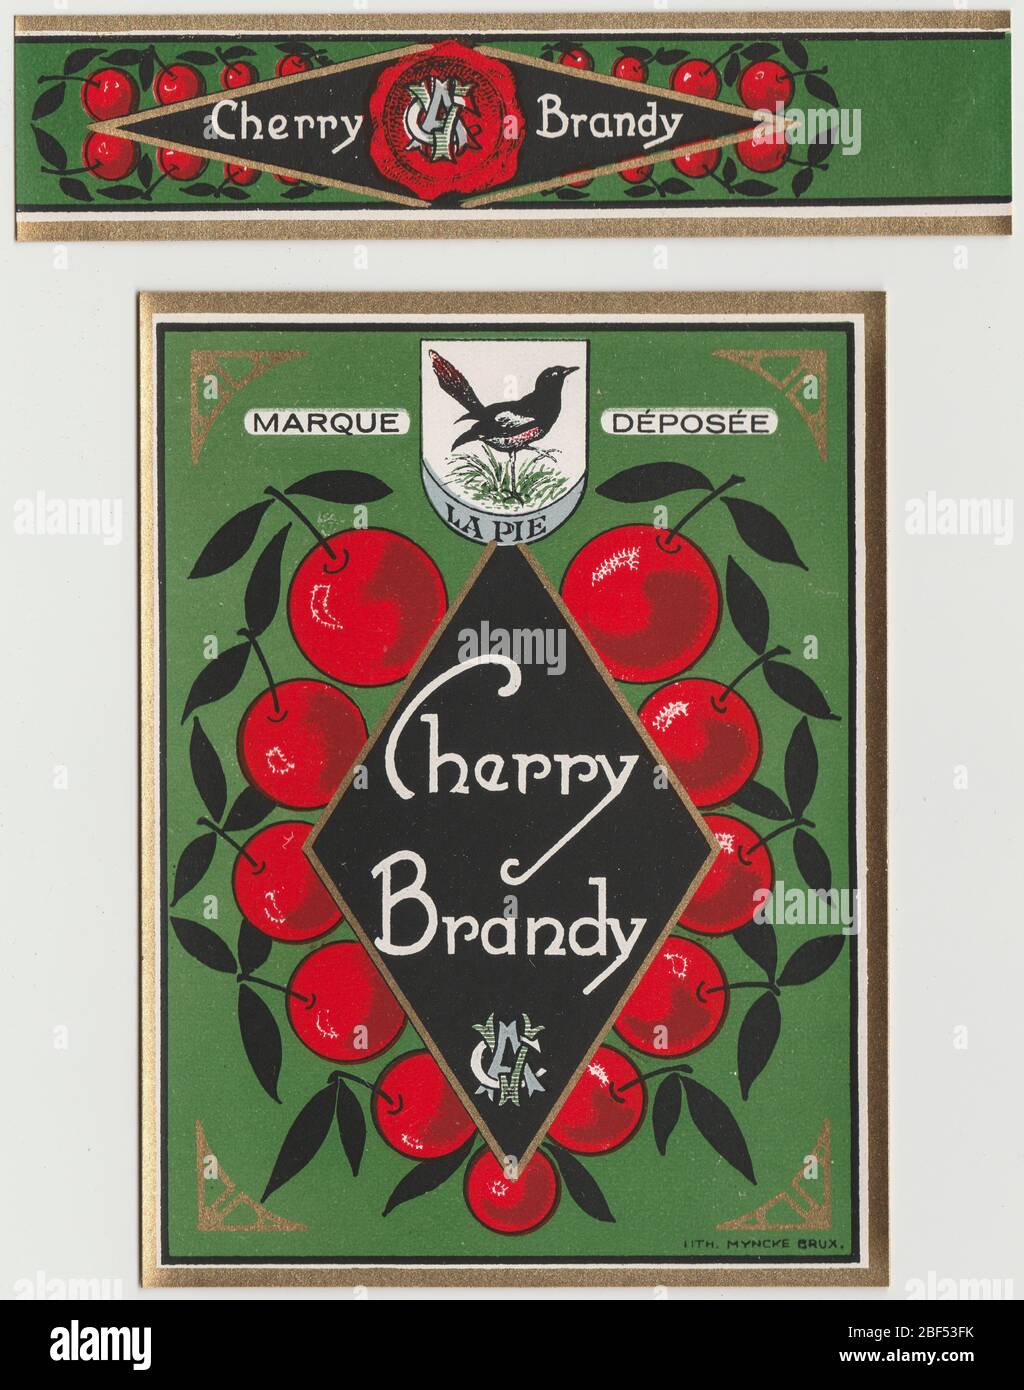 Unused and rare vintage label of a Cherry Brandy liquor, this label is decorated with red cherries. Brandy is a spirit produced by distilling wine. Br Stock Photo